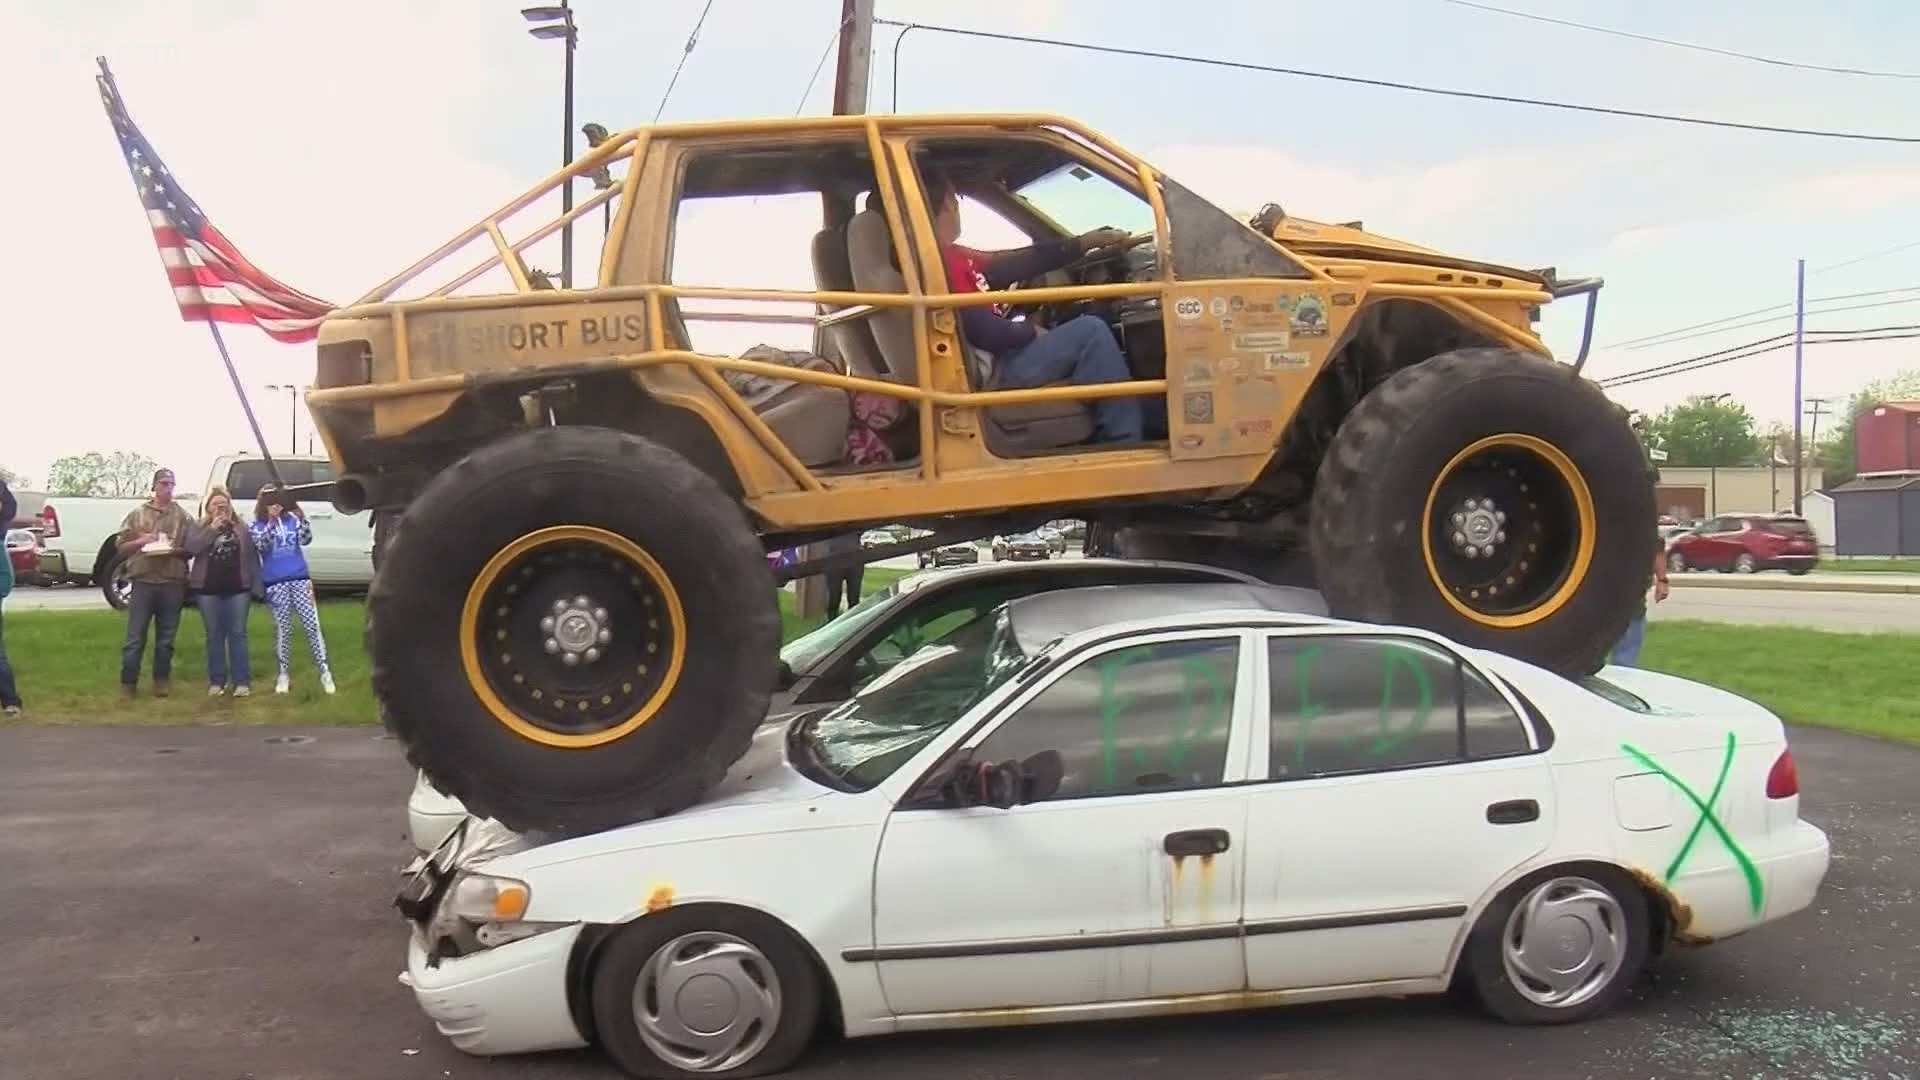 Folks are getting excited for Jeep Fest later this year, especially after being cooped up for the last year.